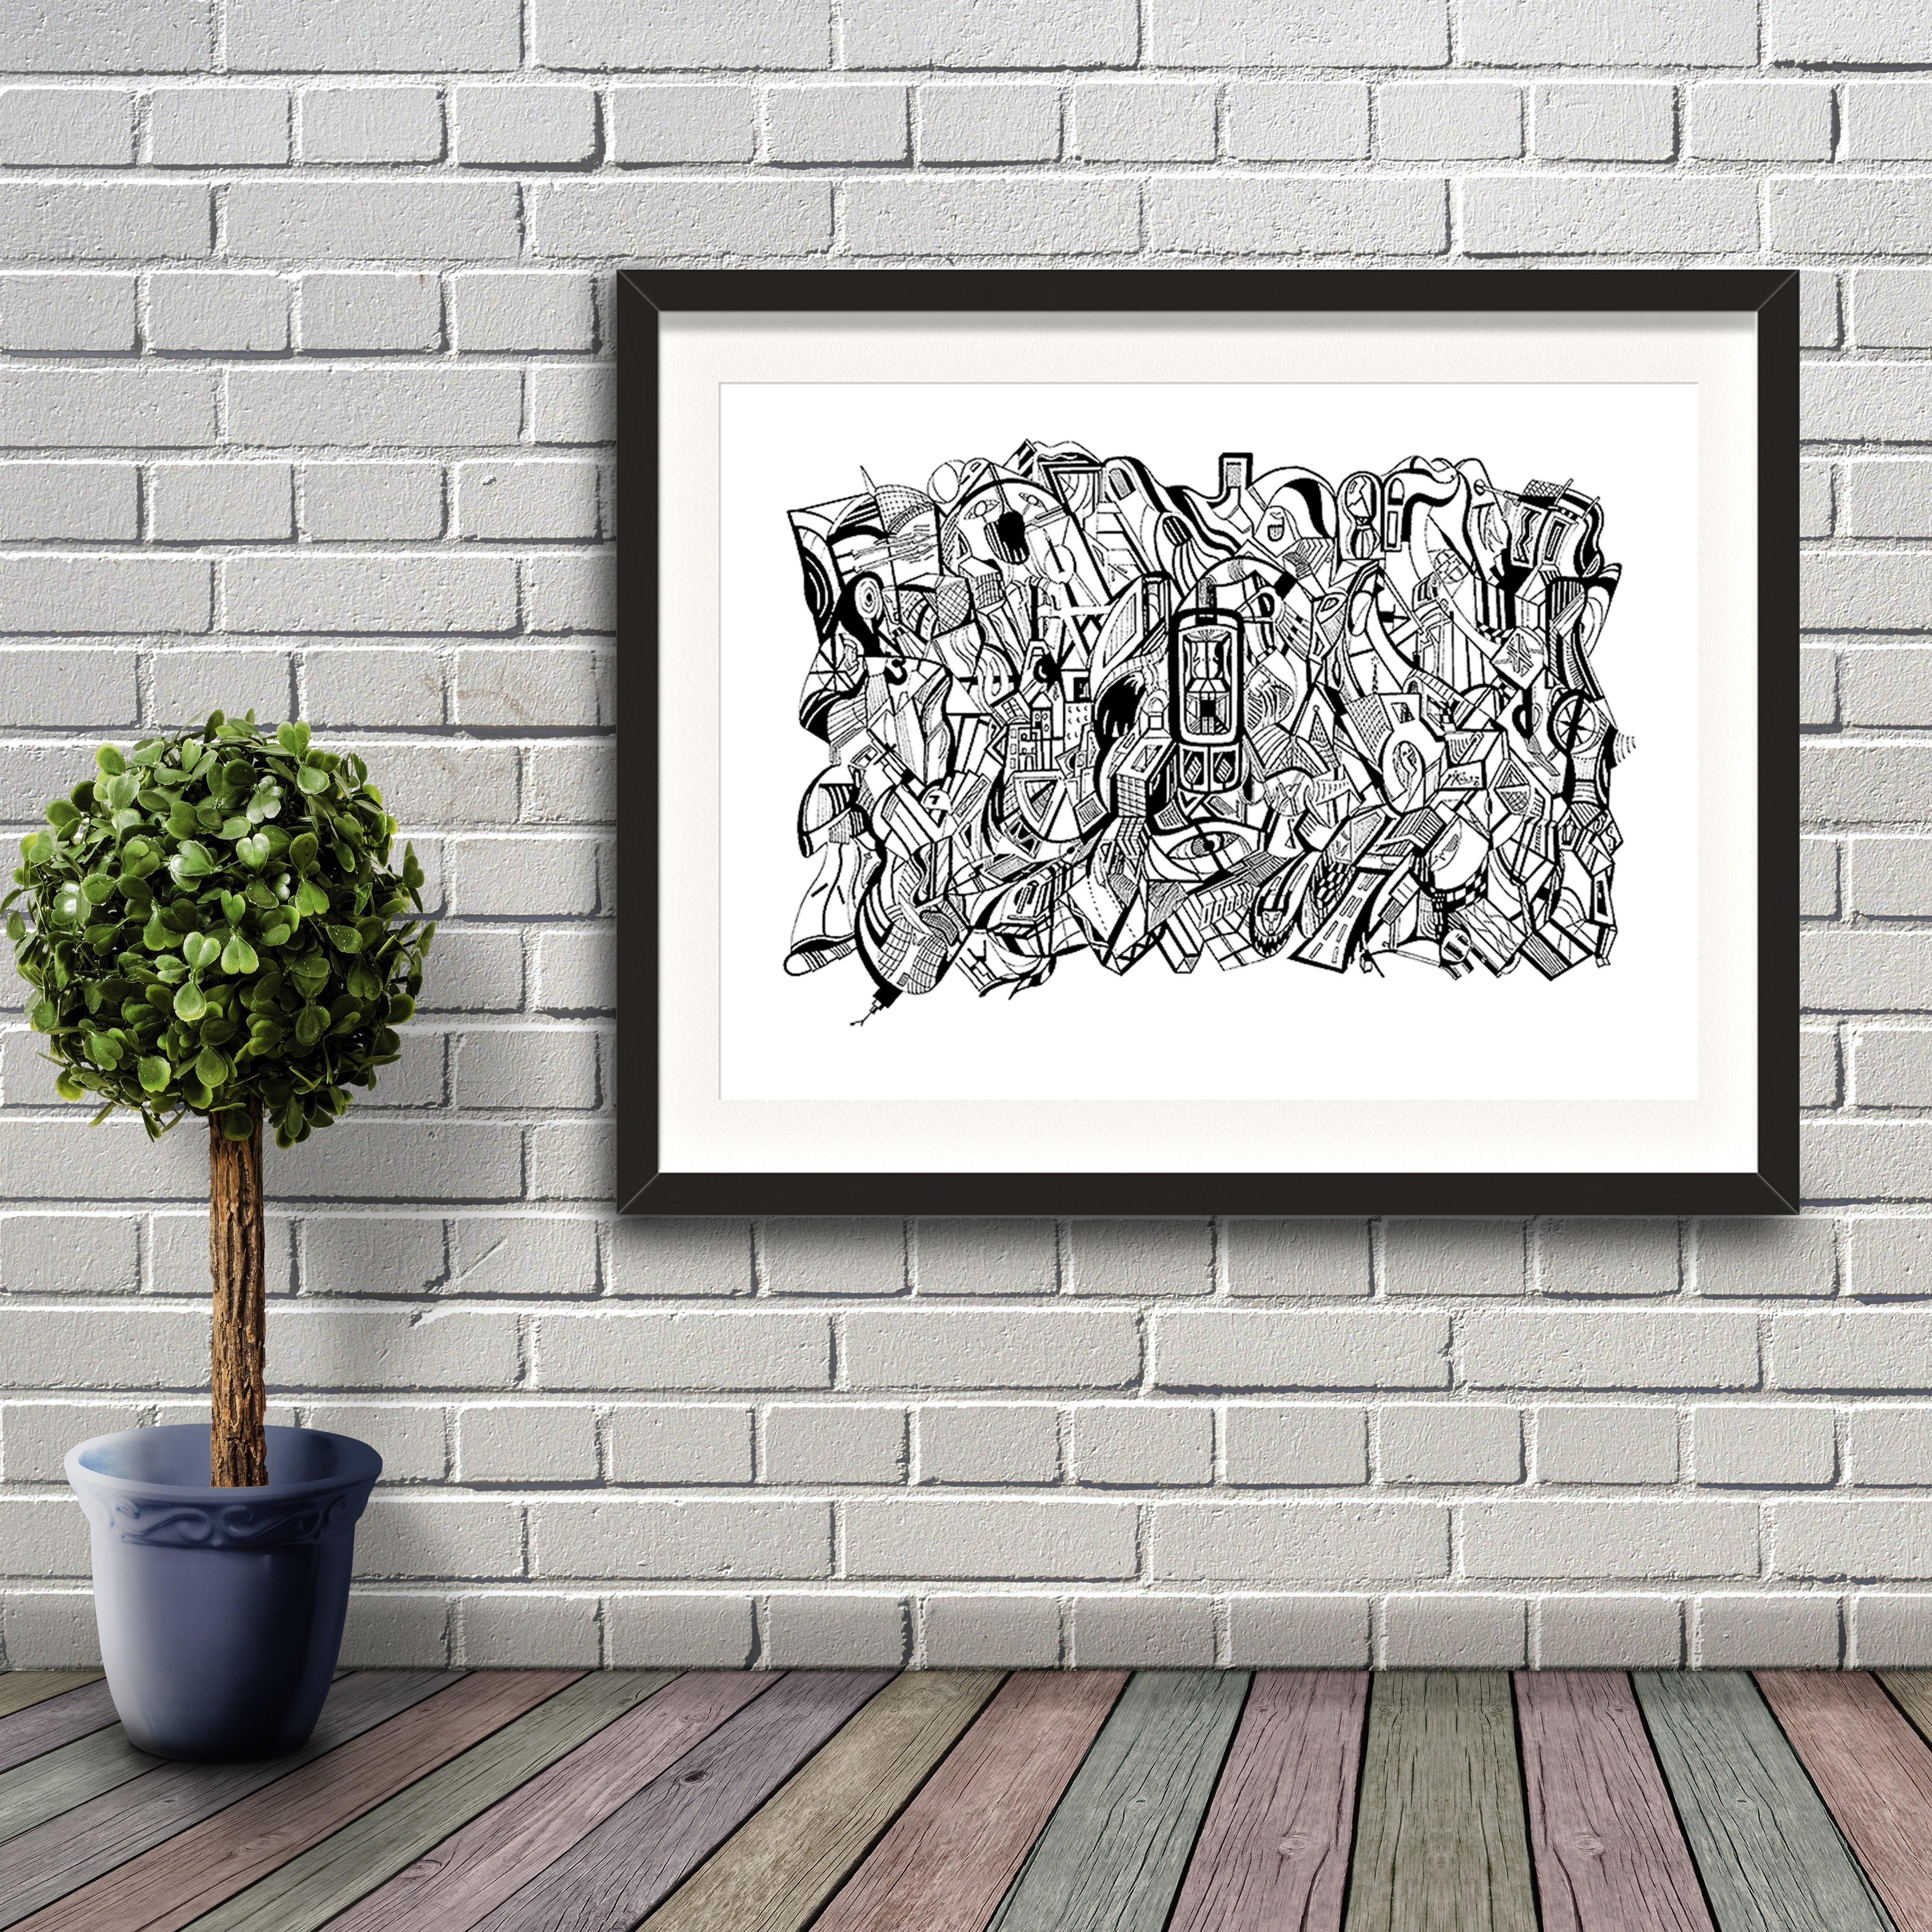 A fine art print from Jason Clarke titled Mobile drawn with a black Pentel pen. Artwork shown in a black frame hanging on a brick wall.